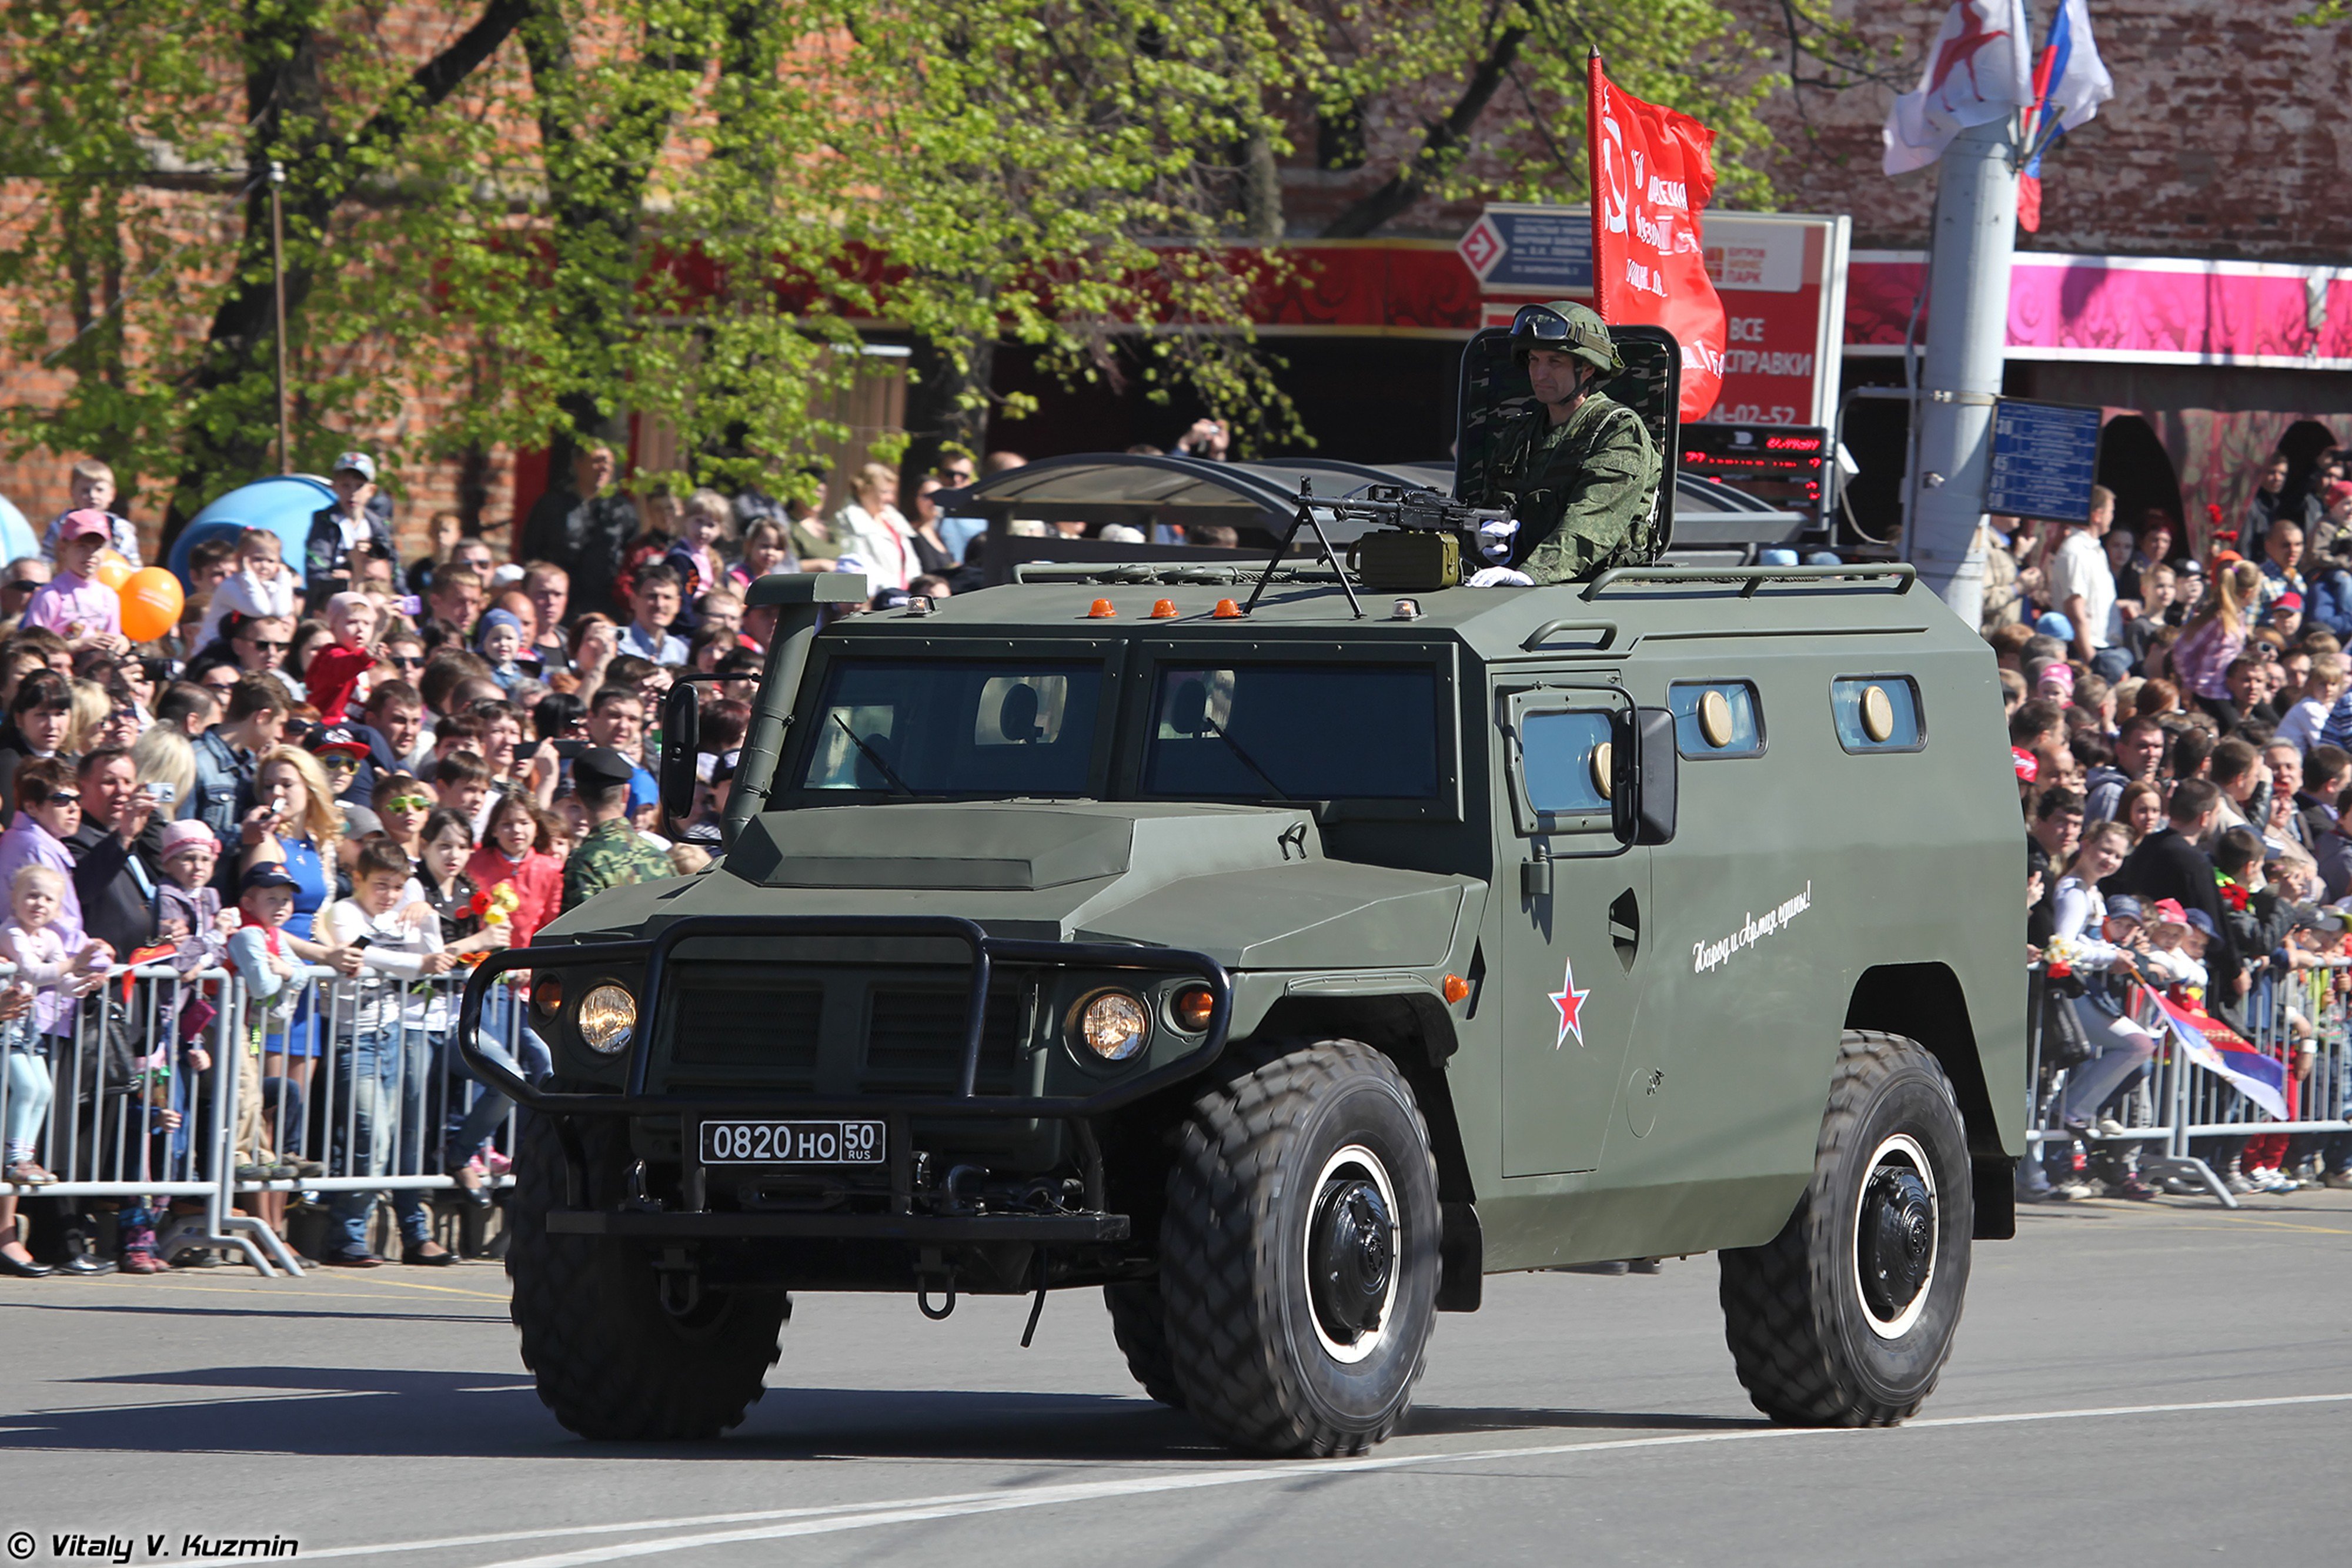 2014, Victory, Day, Parade in nizhny novgorod, Russia, Military, Russian, Army, Red star, 4x4, Special, Armored, Vehicle, Sbm, Vpk 233136, 4000x2667 Wallpaper